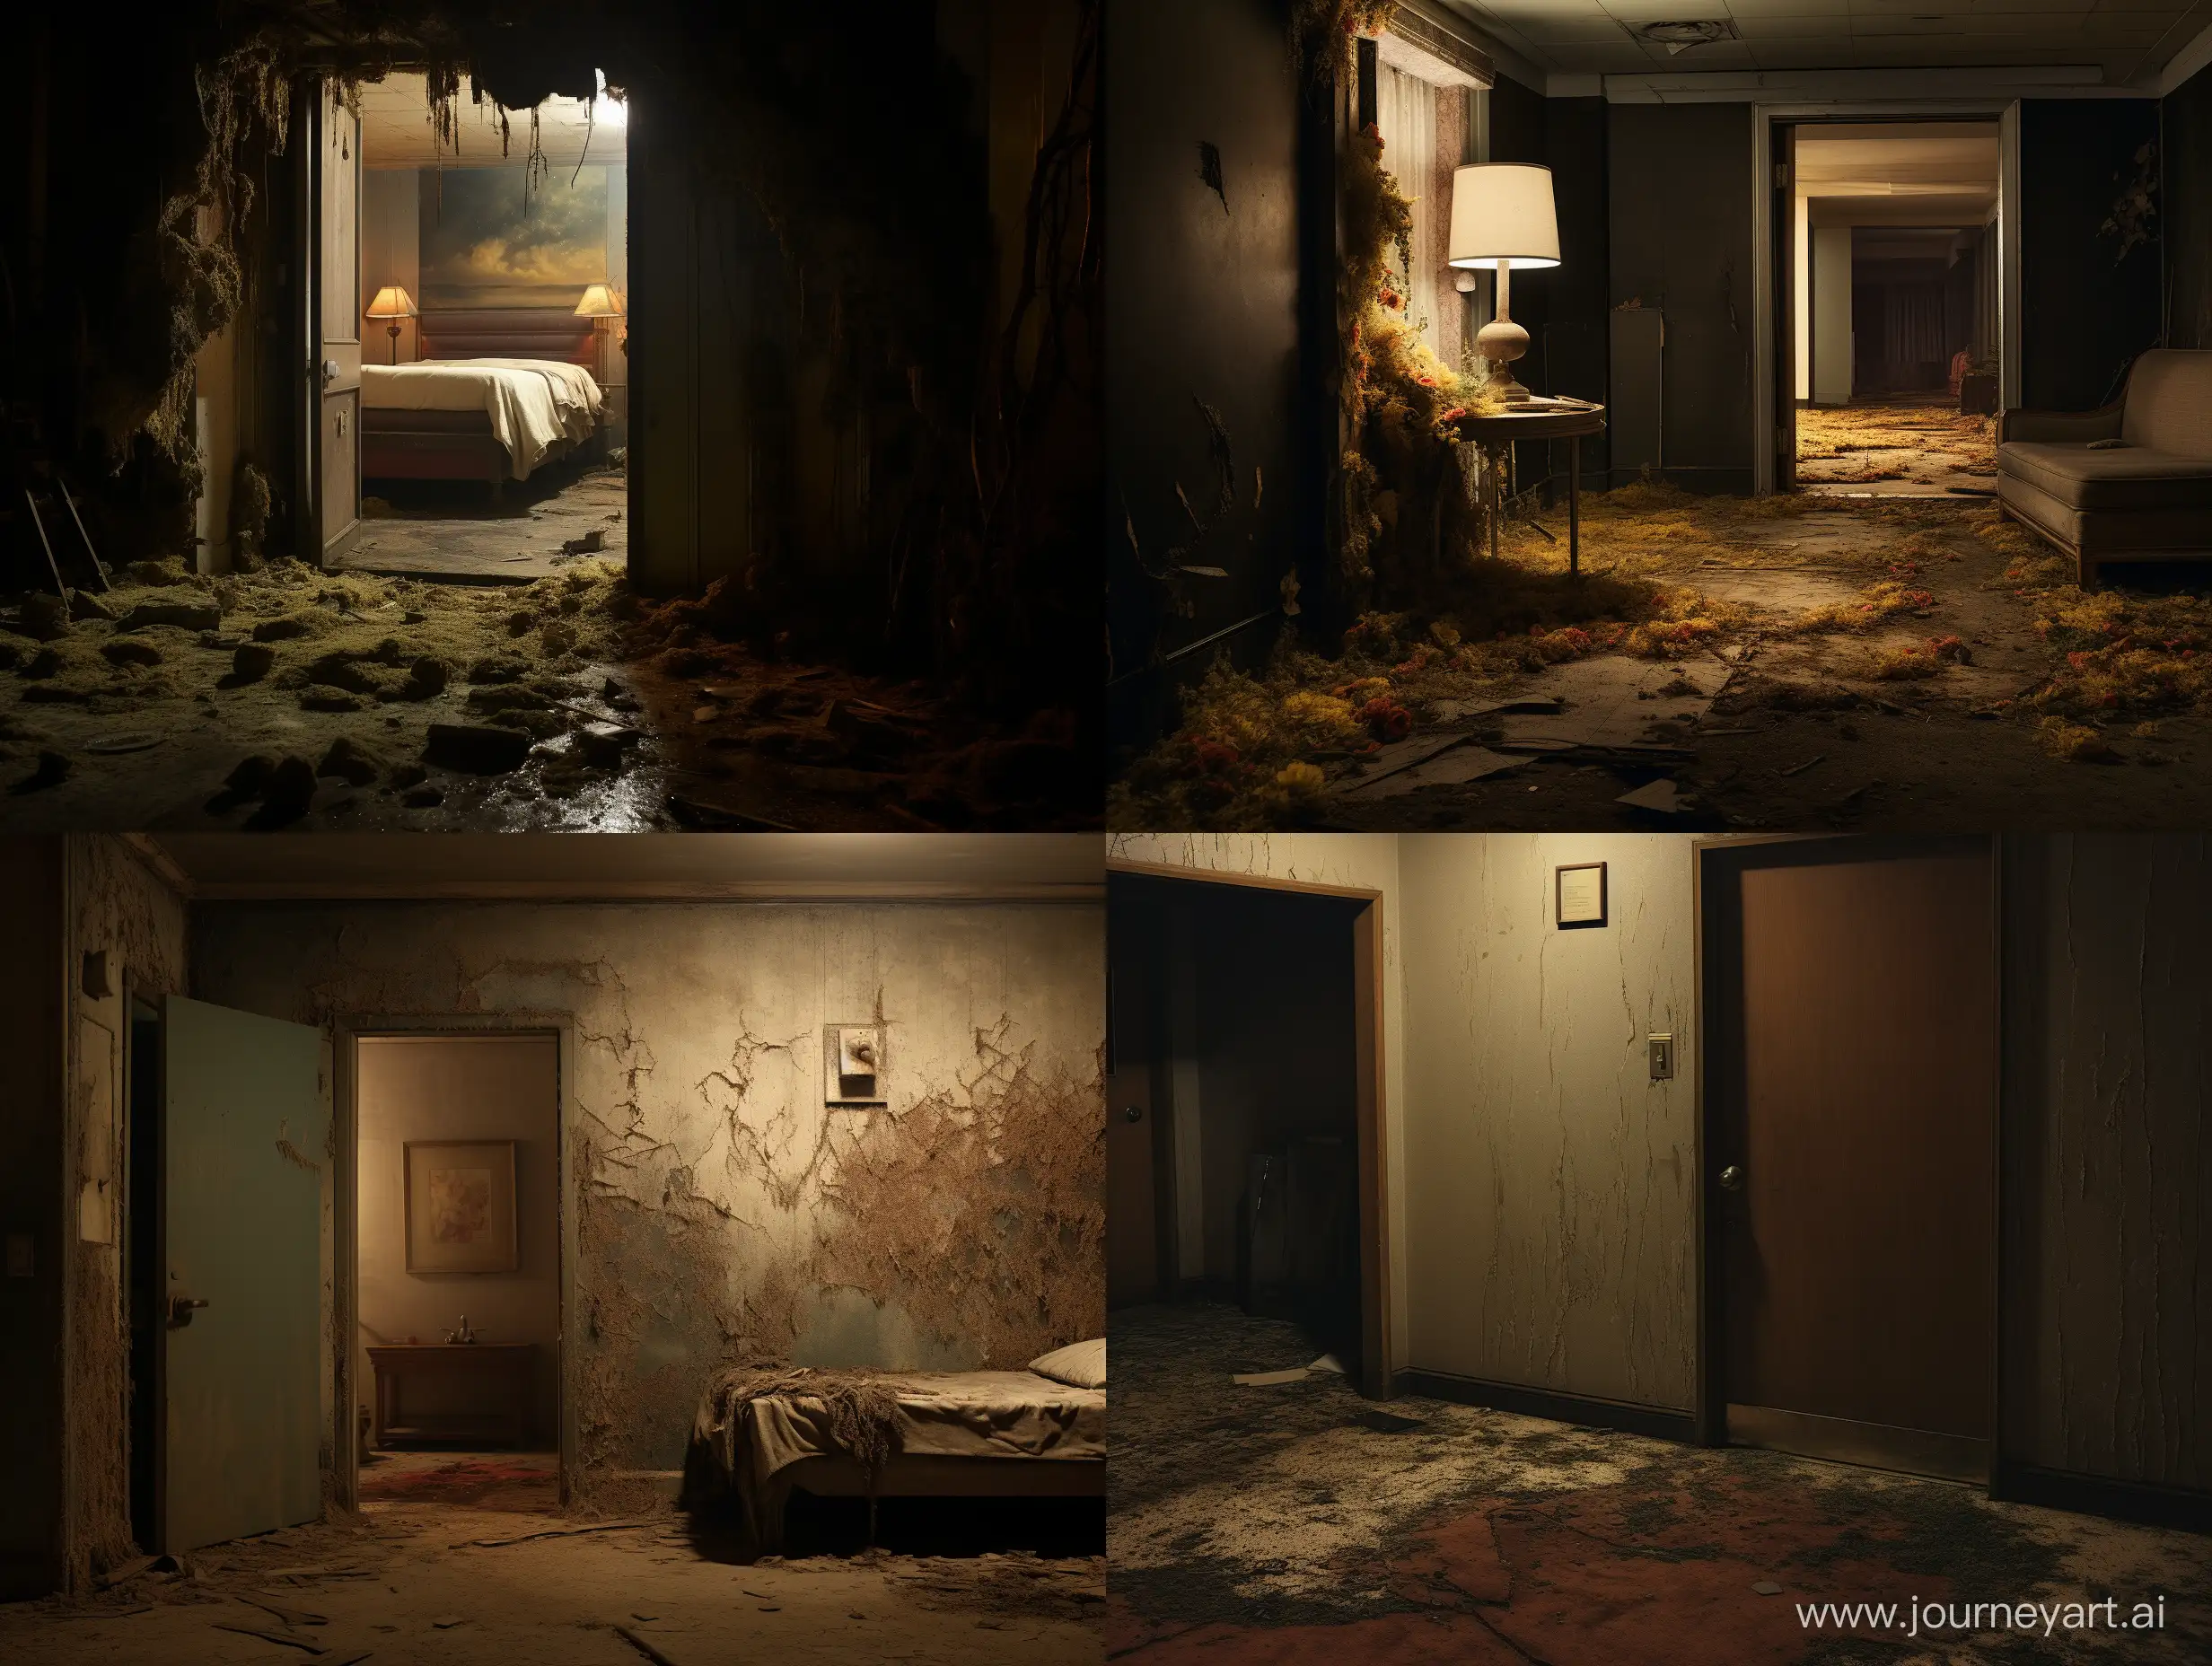 Mysterious-Hotel-Room-with-Eerie-Decay-Odor